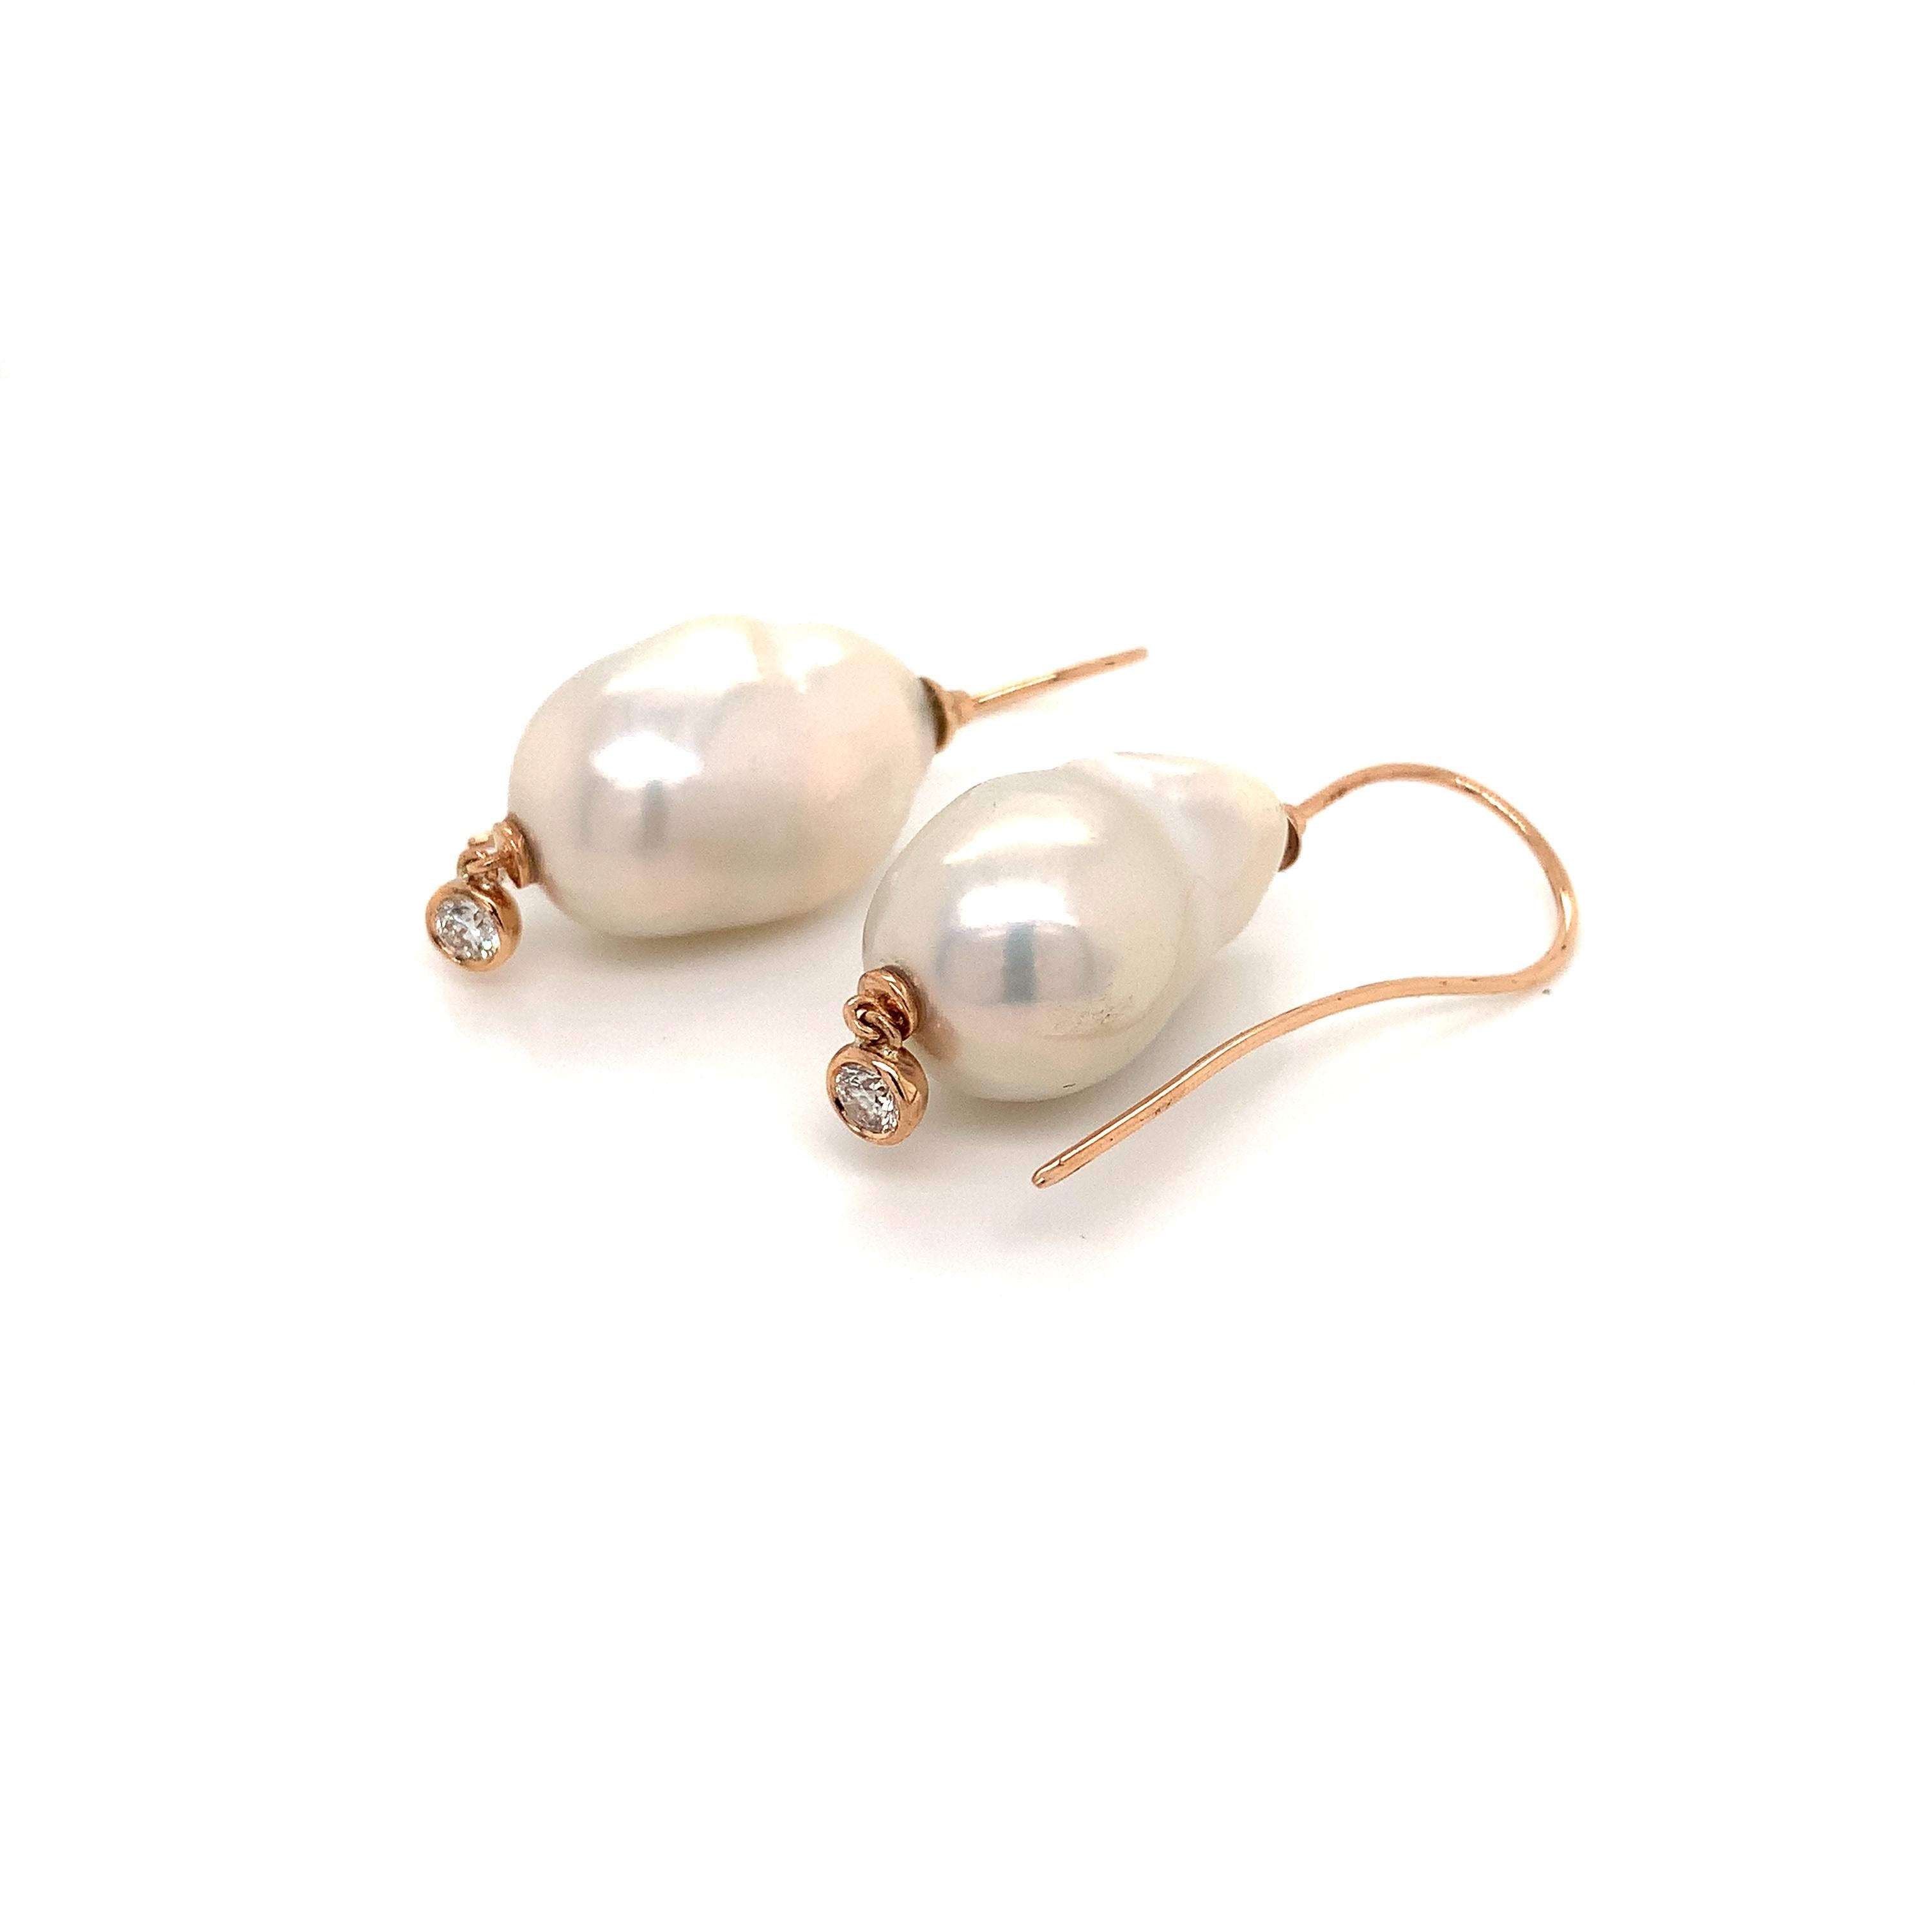 OWN Your Story 14K Rose Gold Diamond and Baroque Pearl Modern Earrings. Perfect pearls to wear all day and transition from day to night! 

OWN Your Story brings its 3 generations of family tradition and unparalleled experience with 18K gold,